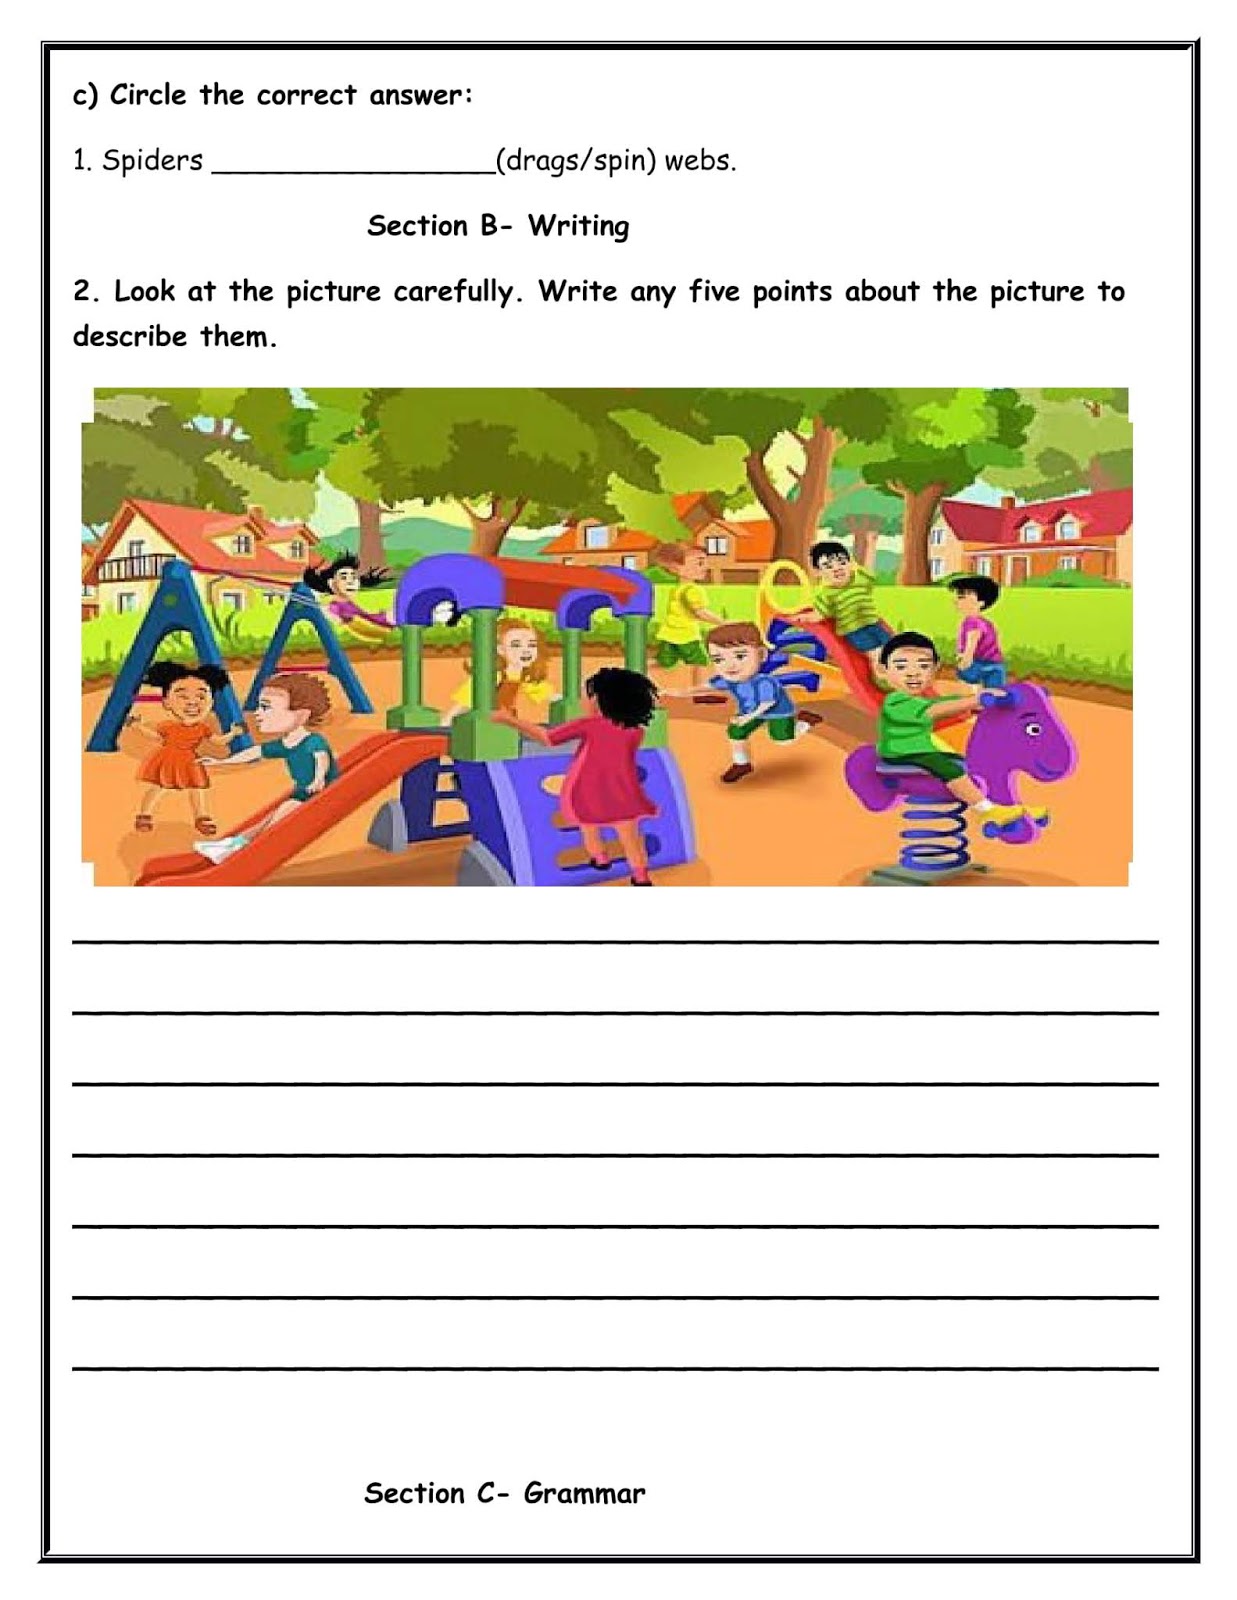 world-school-oman-revision-worksheet-for-grade-3-as-on-14-03-2019